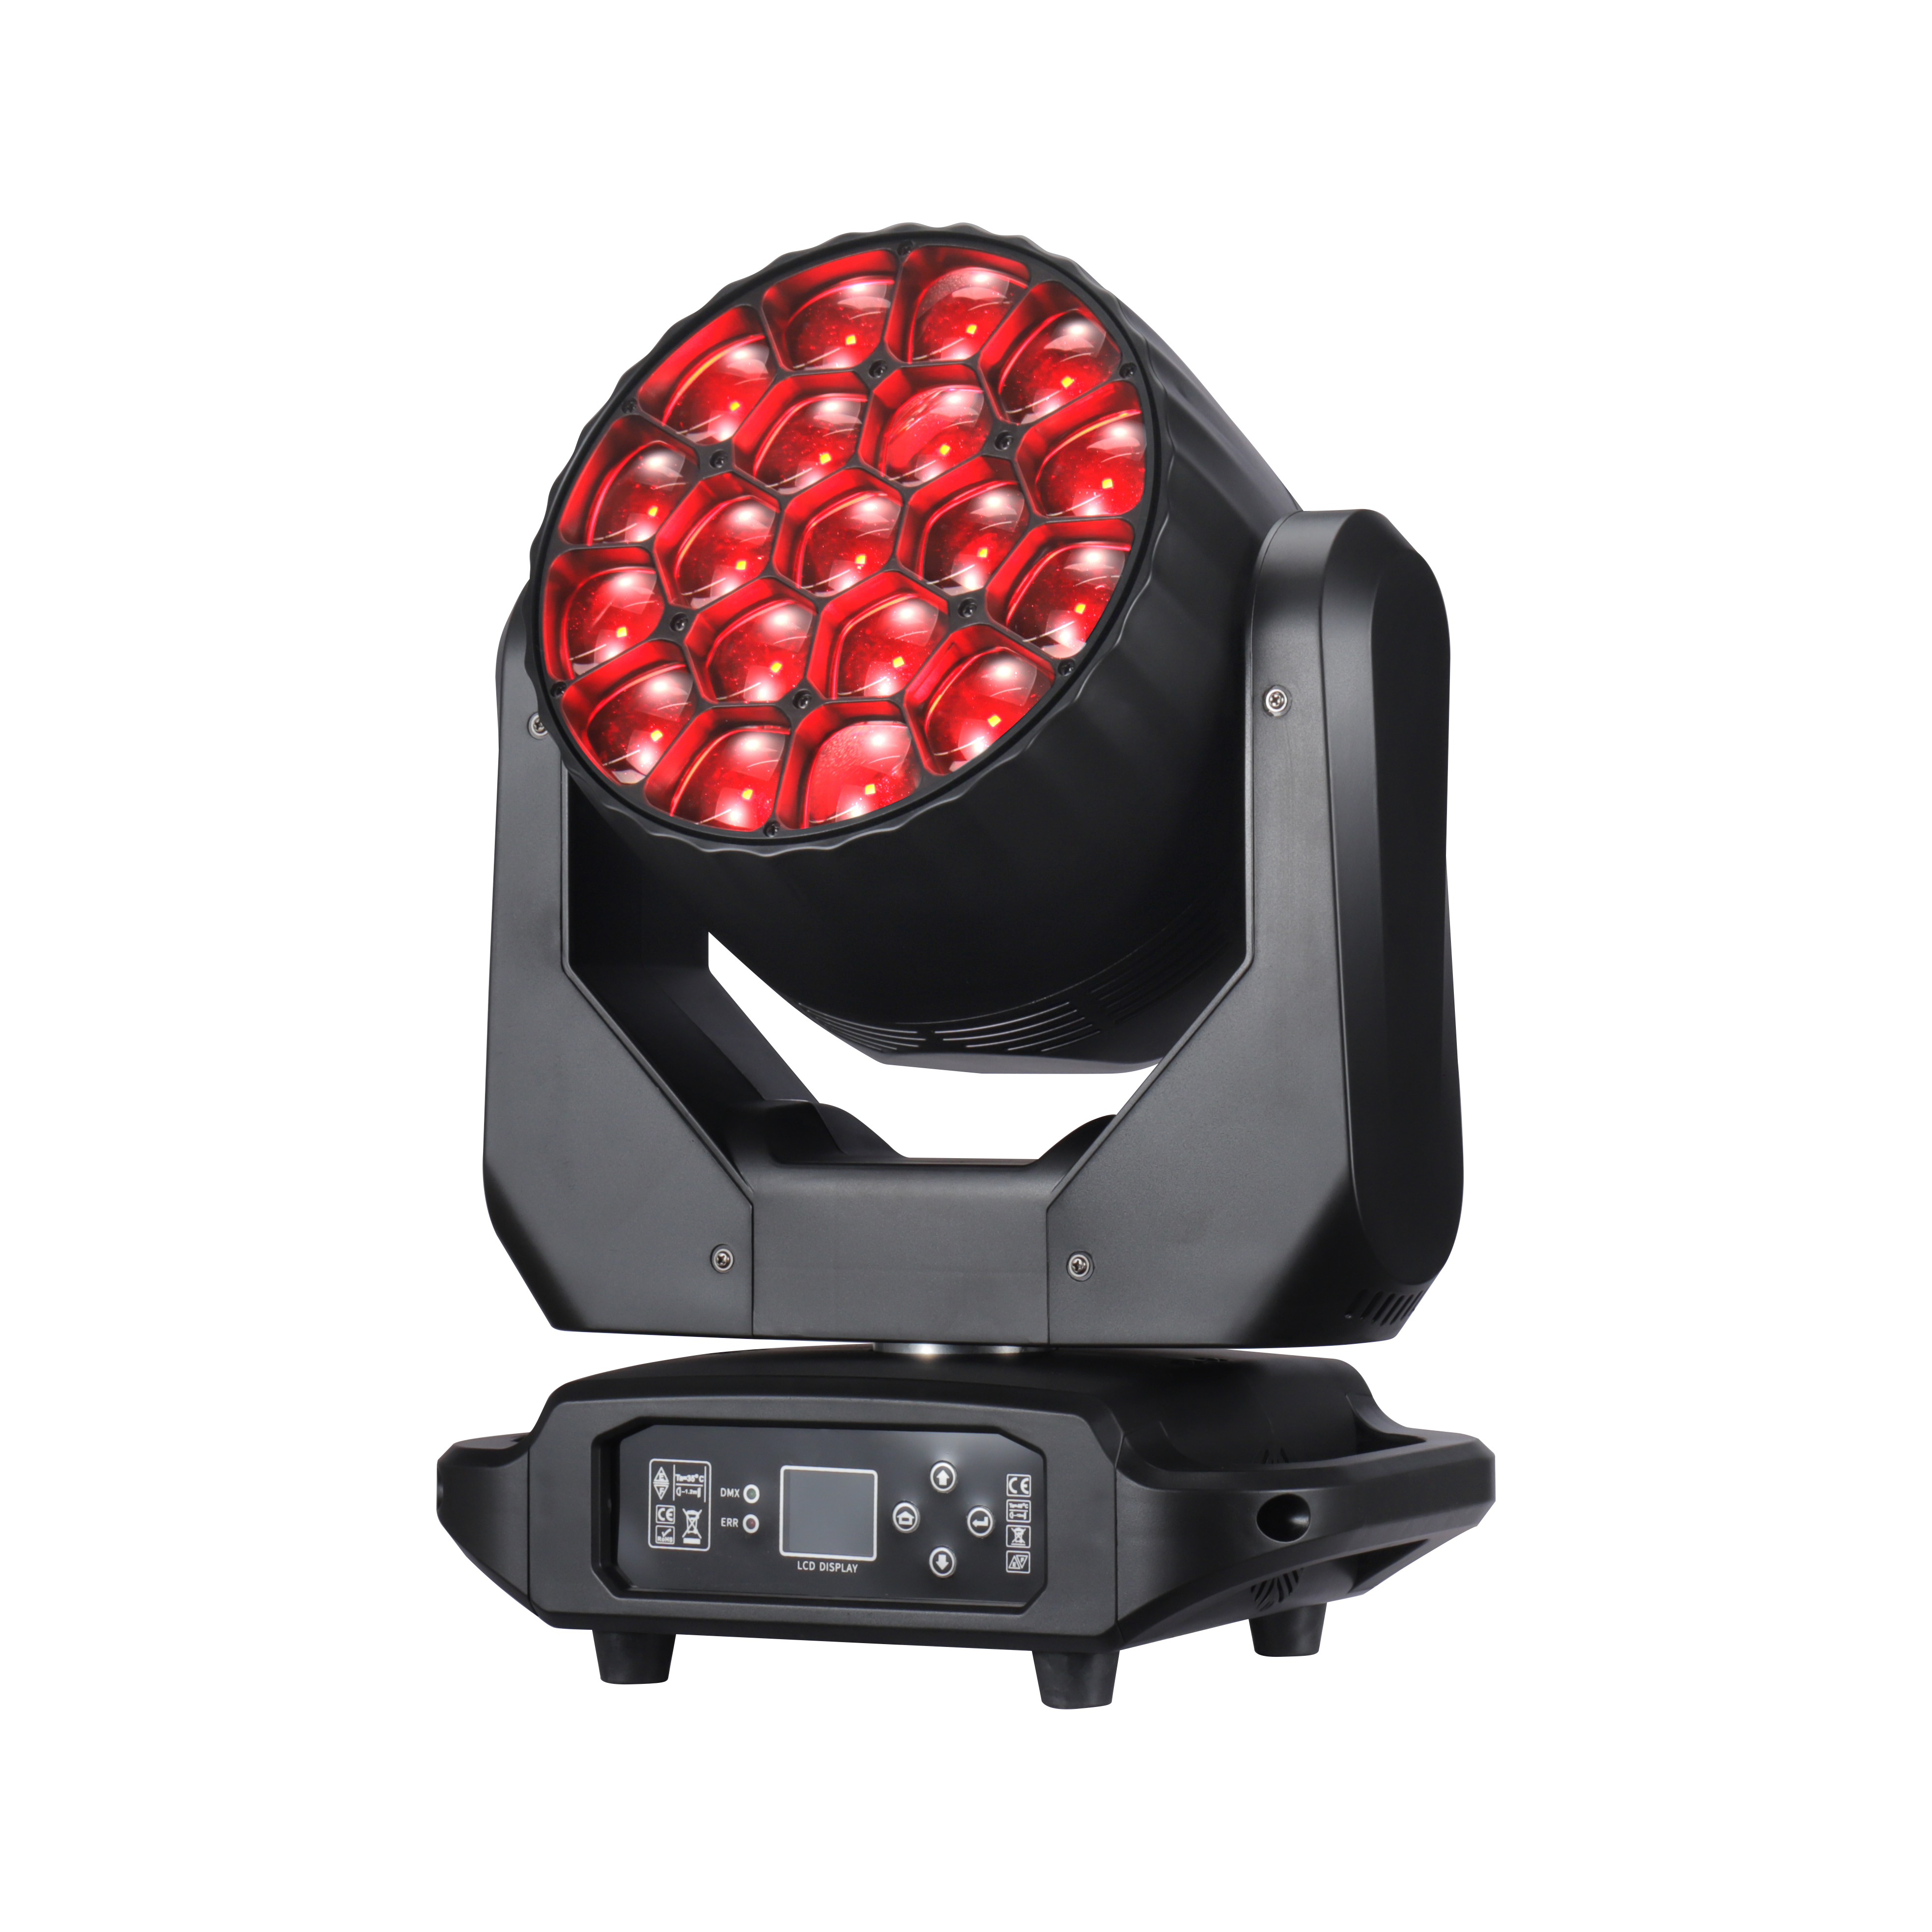 New product launch, latest 19pcs 40W Bee Eye LED moving head light